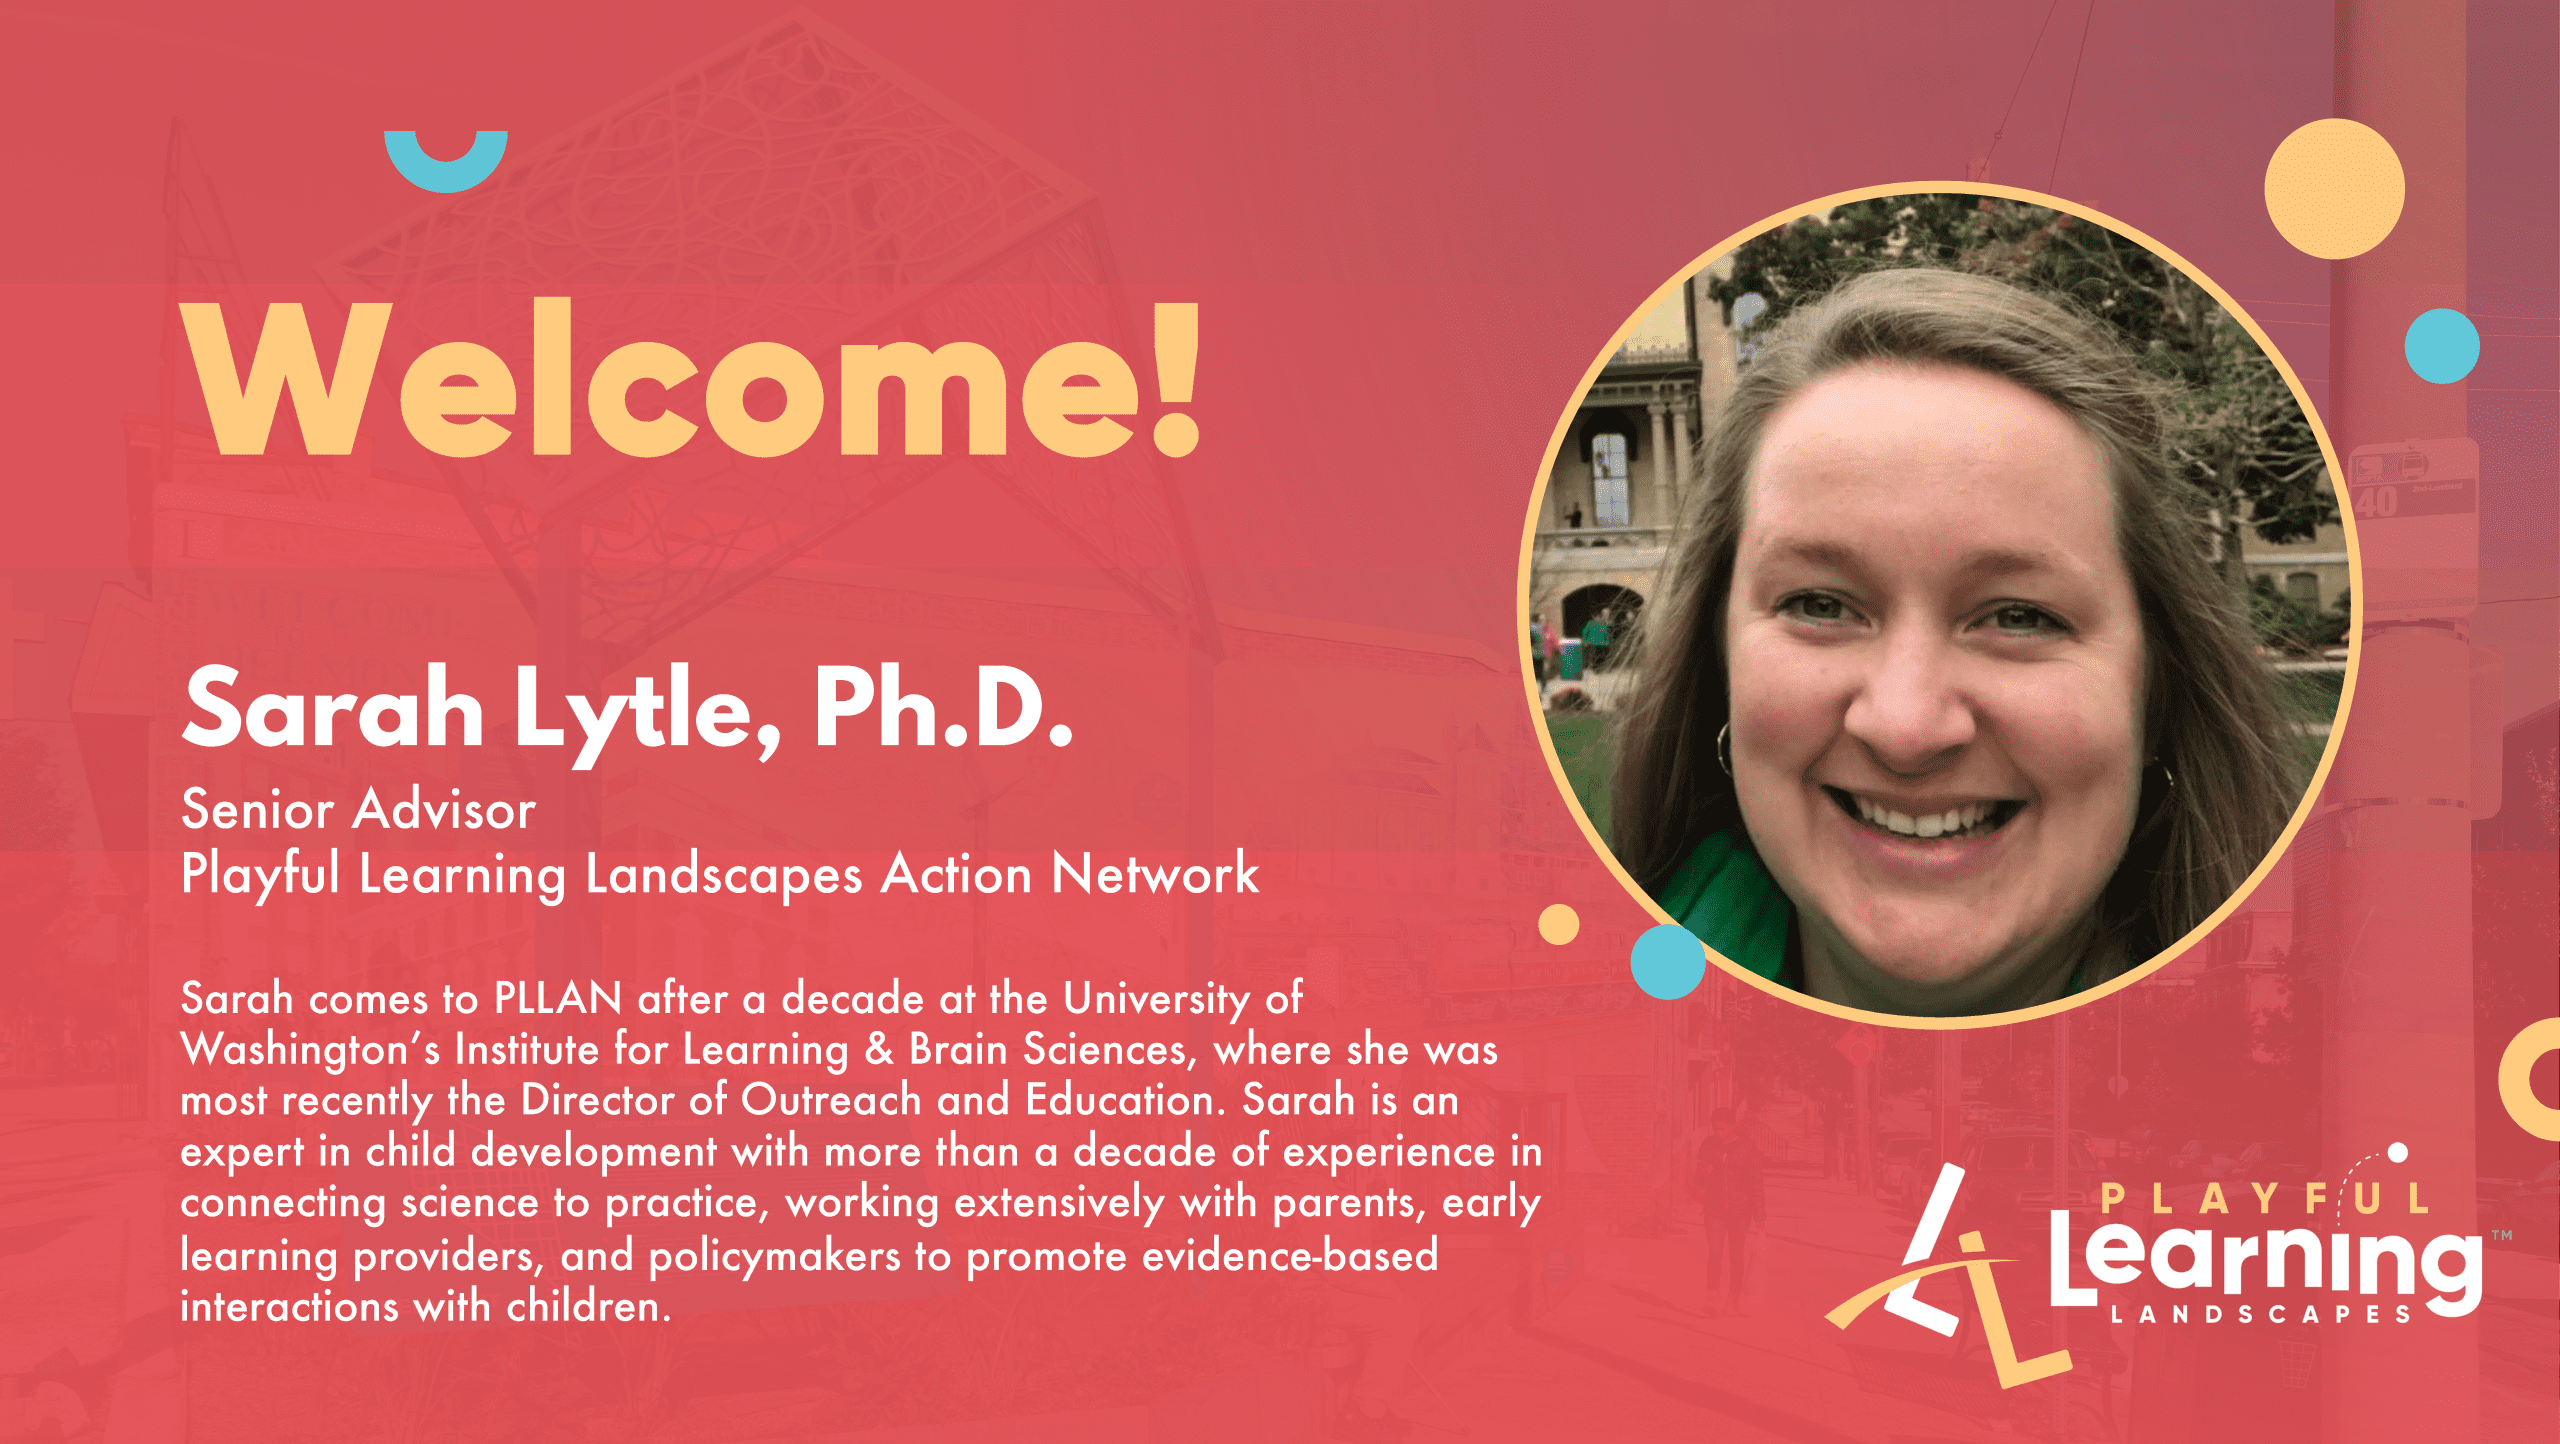 PLLAN: Playful Learning Landscapes Action Network Welcomes Sarah Lytle, Ph.D.